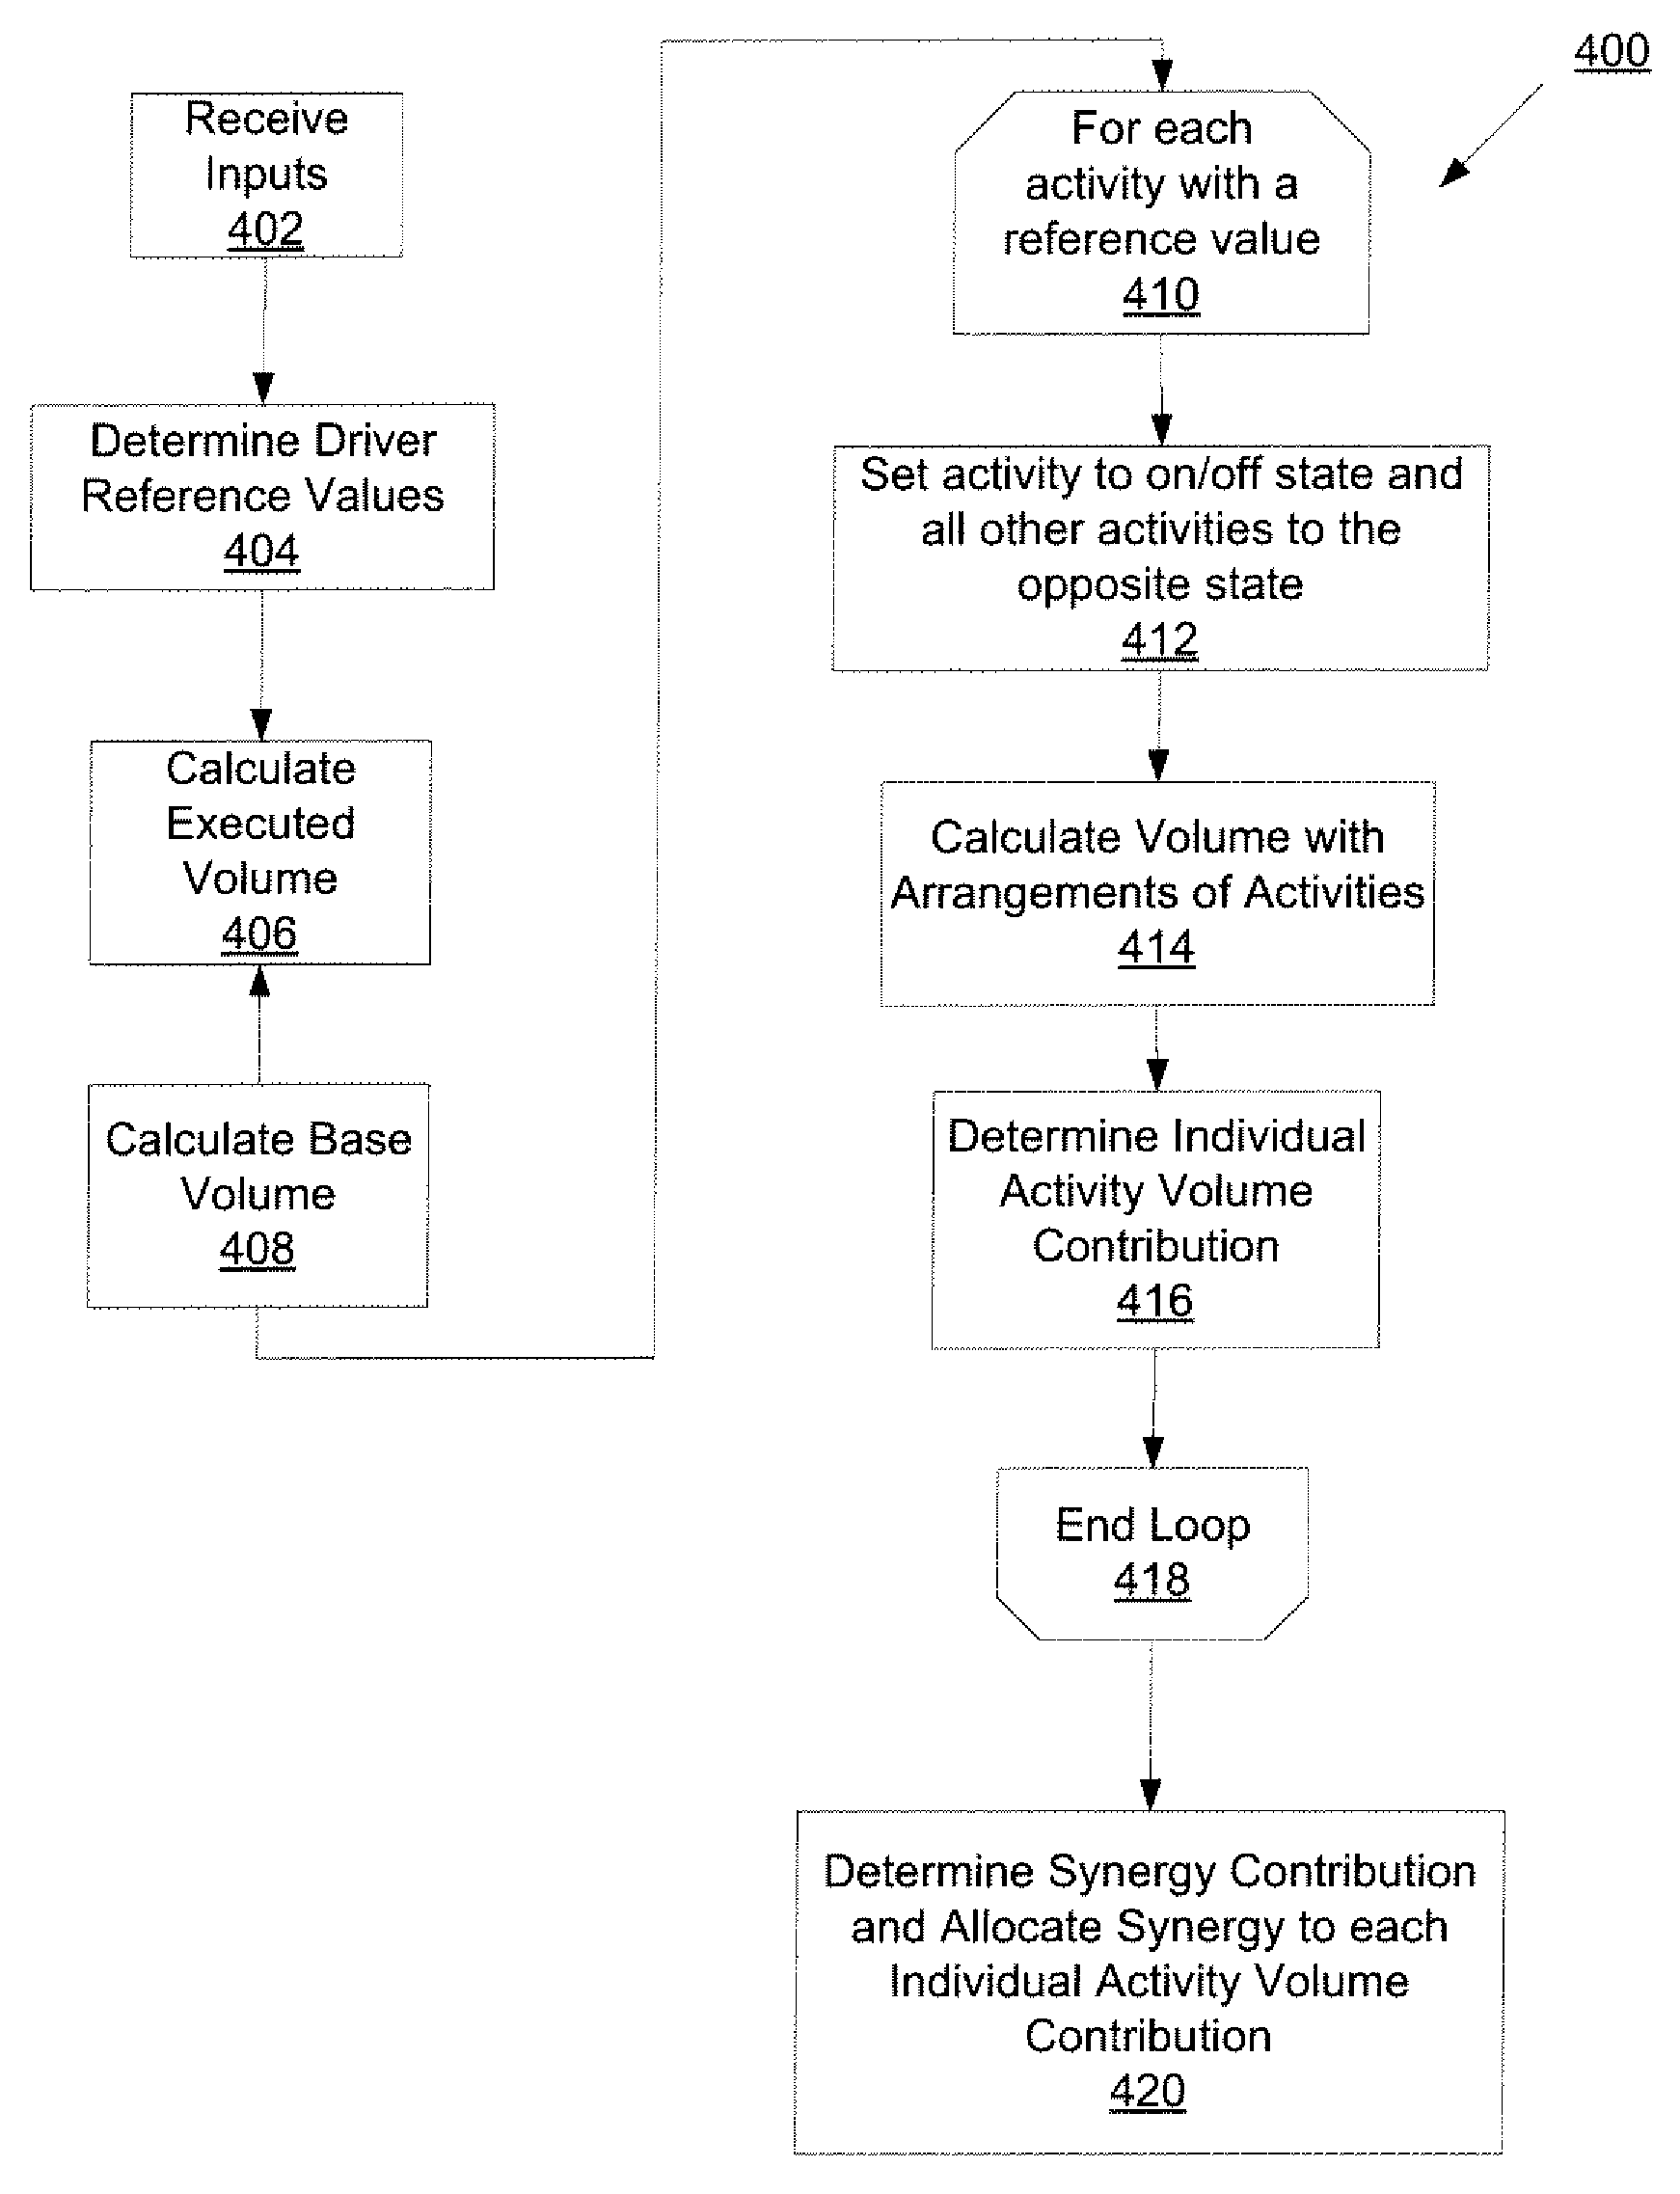 Method and apparatus for creating due-to reports for activities that may not have reference value